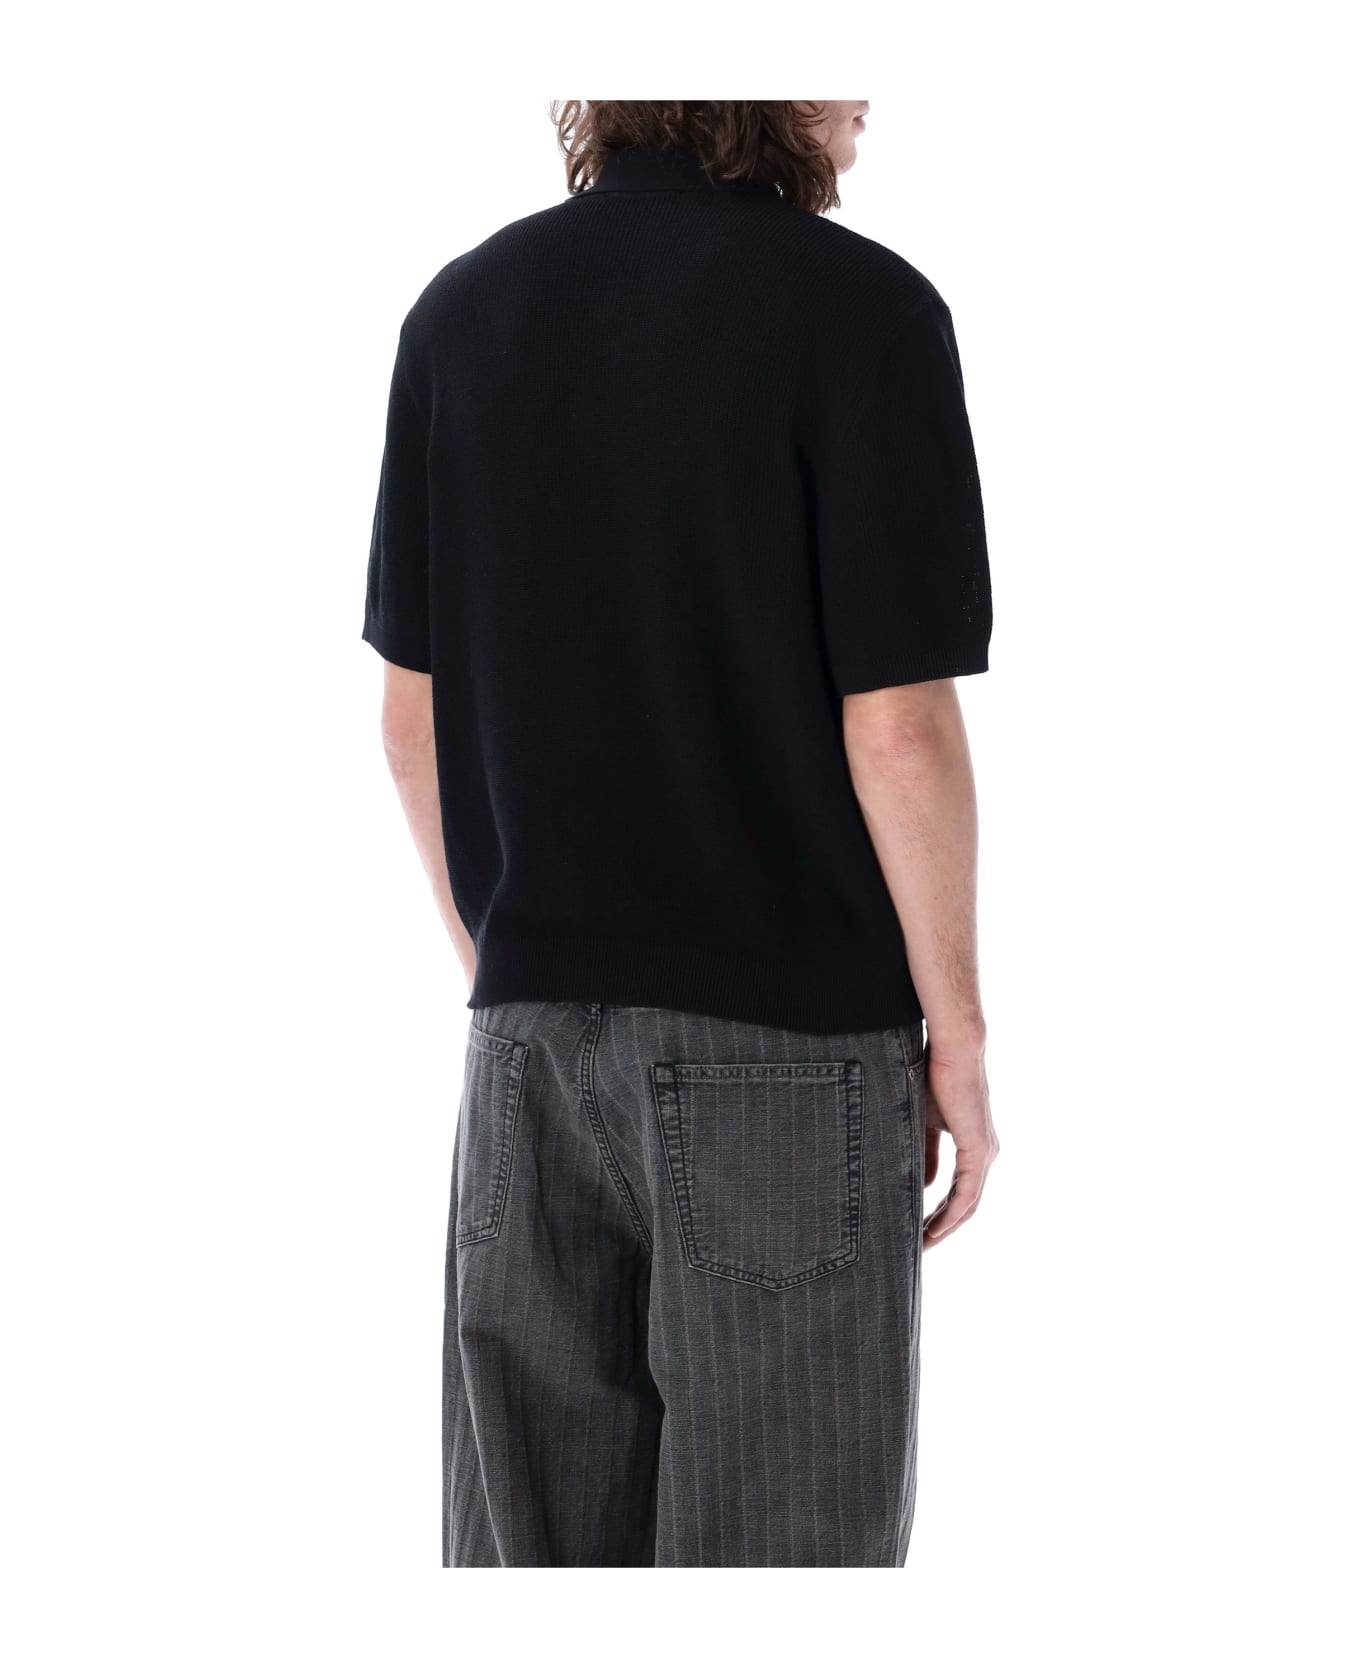 Our Legacy Traditional Knit Polo Shirt - SHADOW BLACK